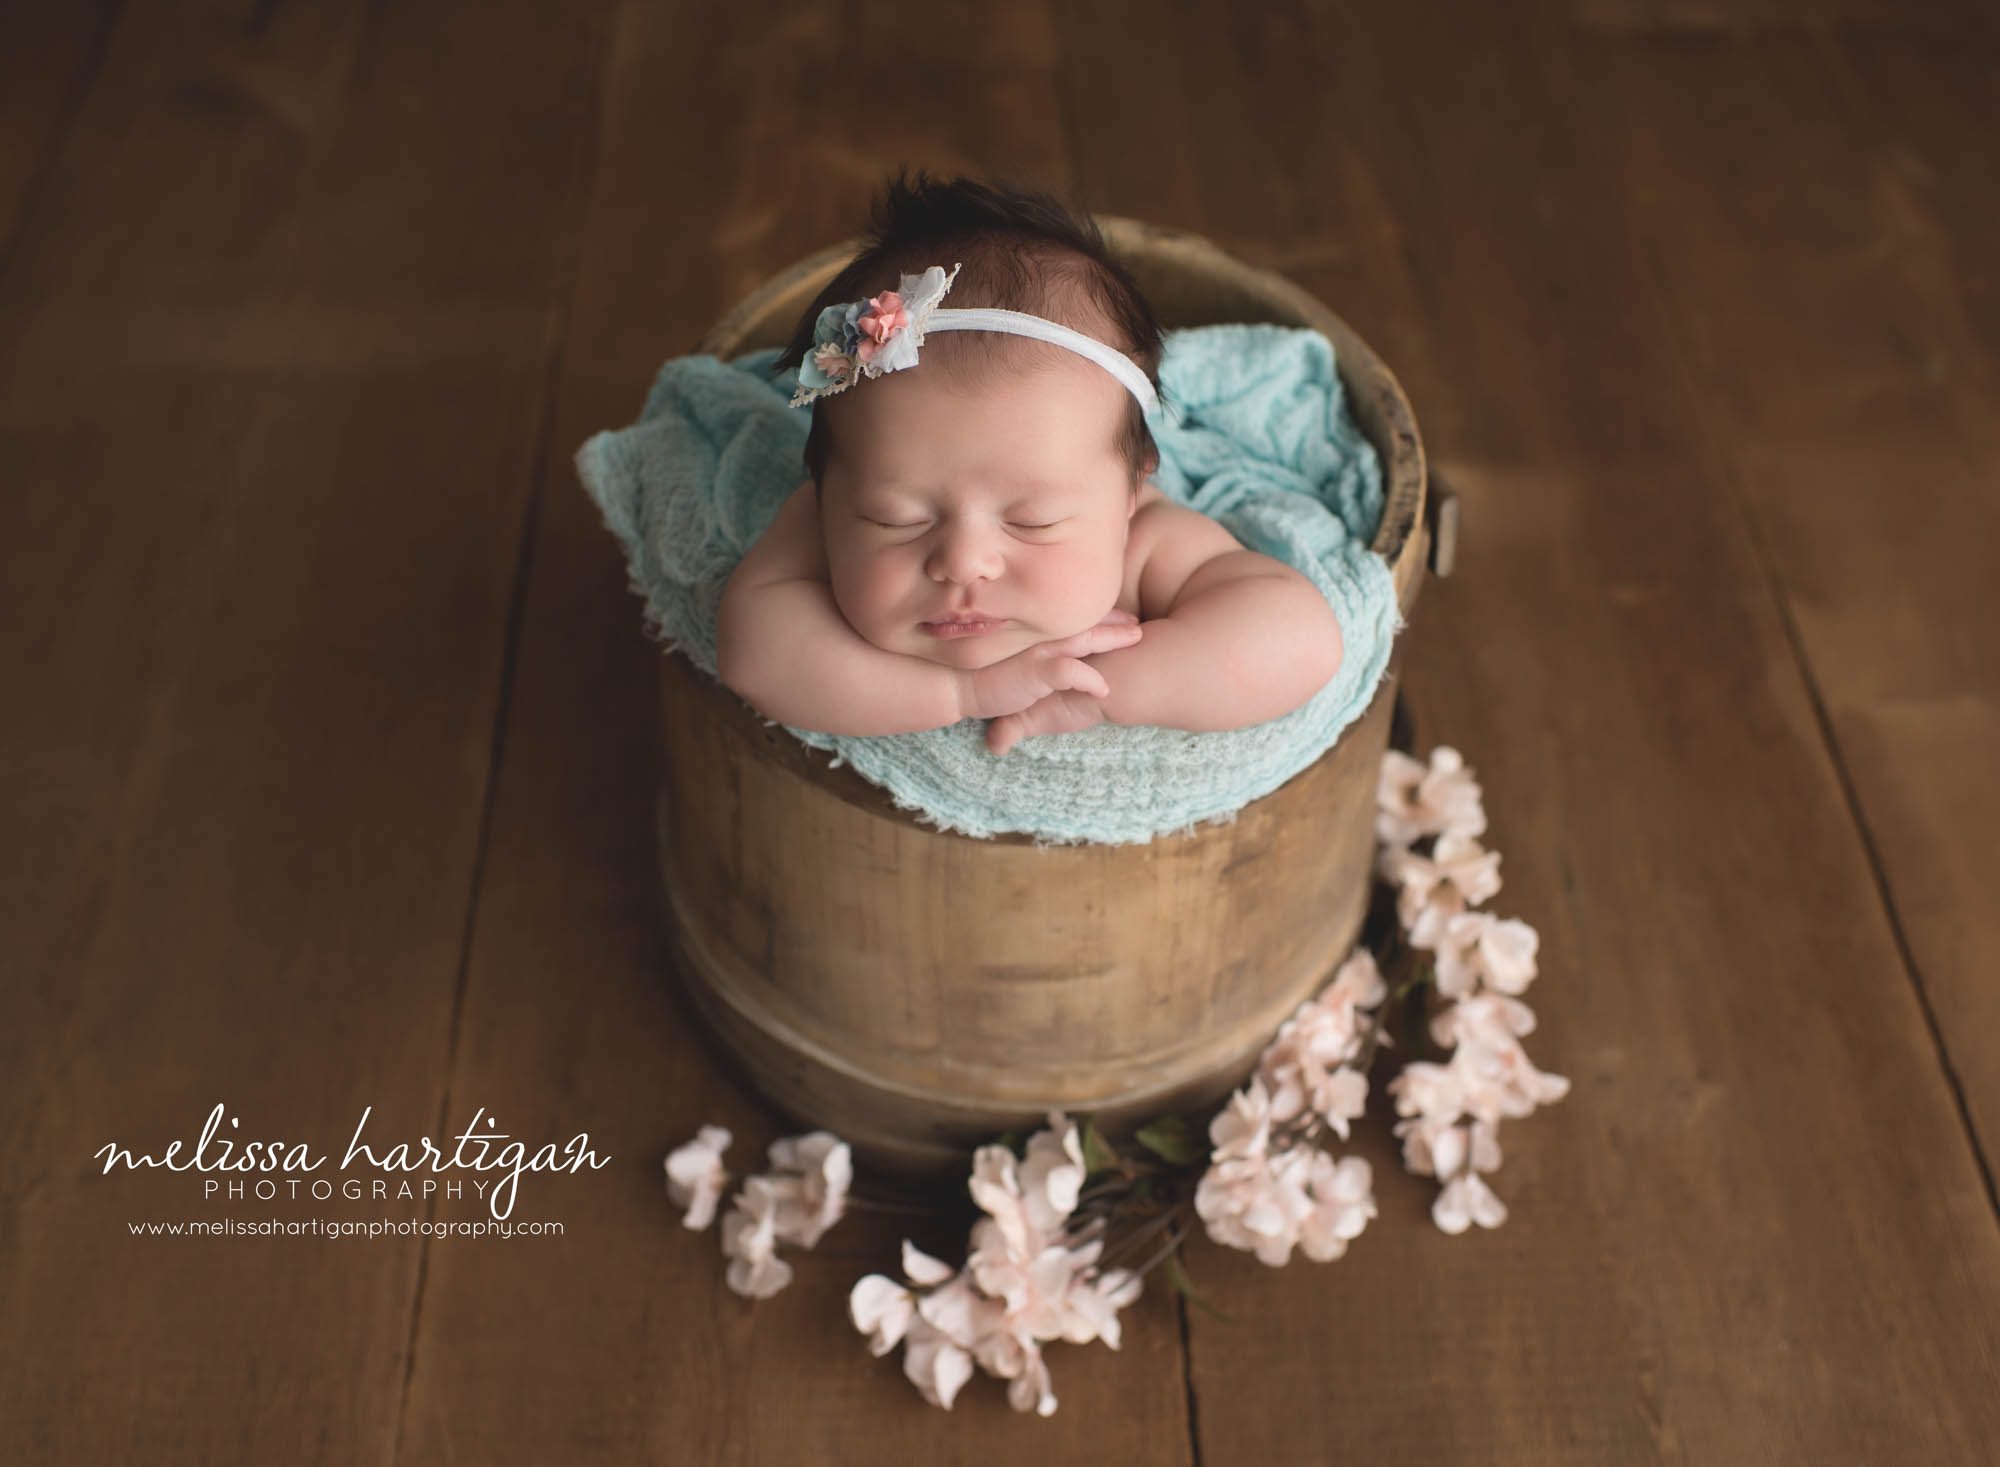 Melissa Hartigan Photography Connecticut Newborn Photographer Coventry Ct Middlefield CT baby Fairfield county Newborn and maternity photography Baby girl floral headband sleeping in wooden bucket with blue wrap